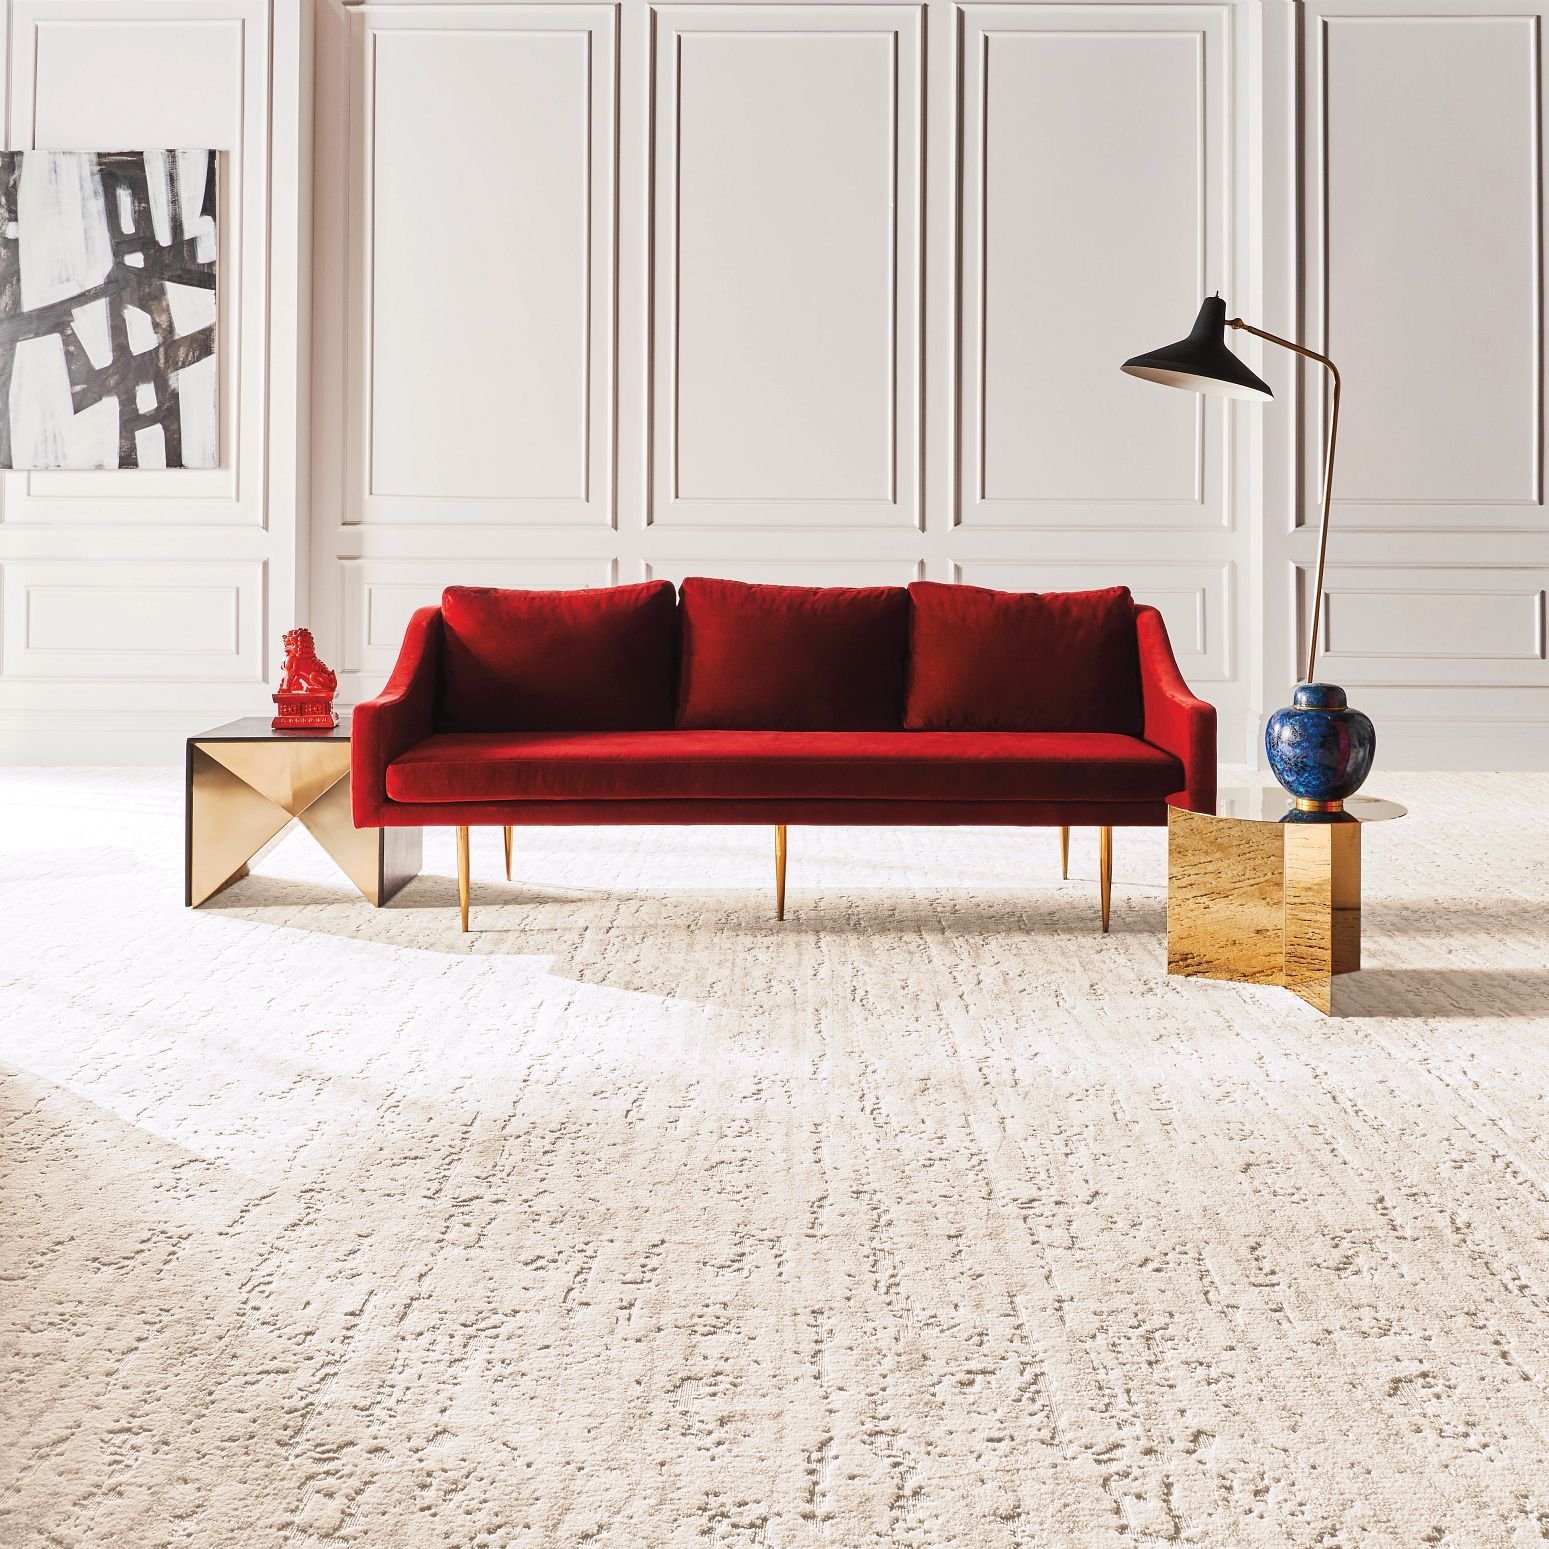 Red couch on carpet from Milford Floor Covering in Milford